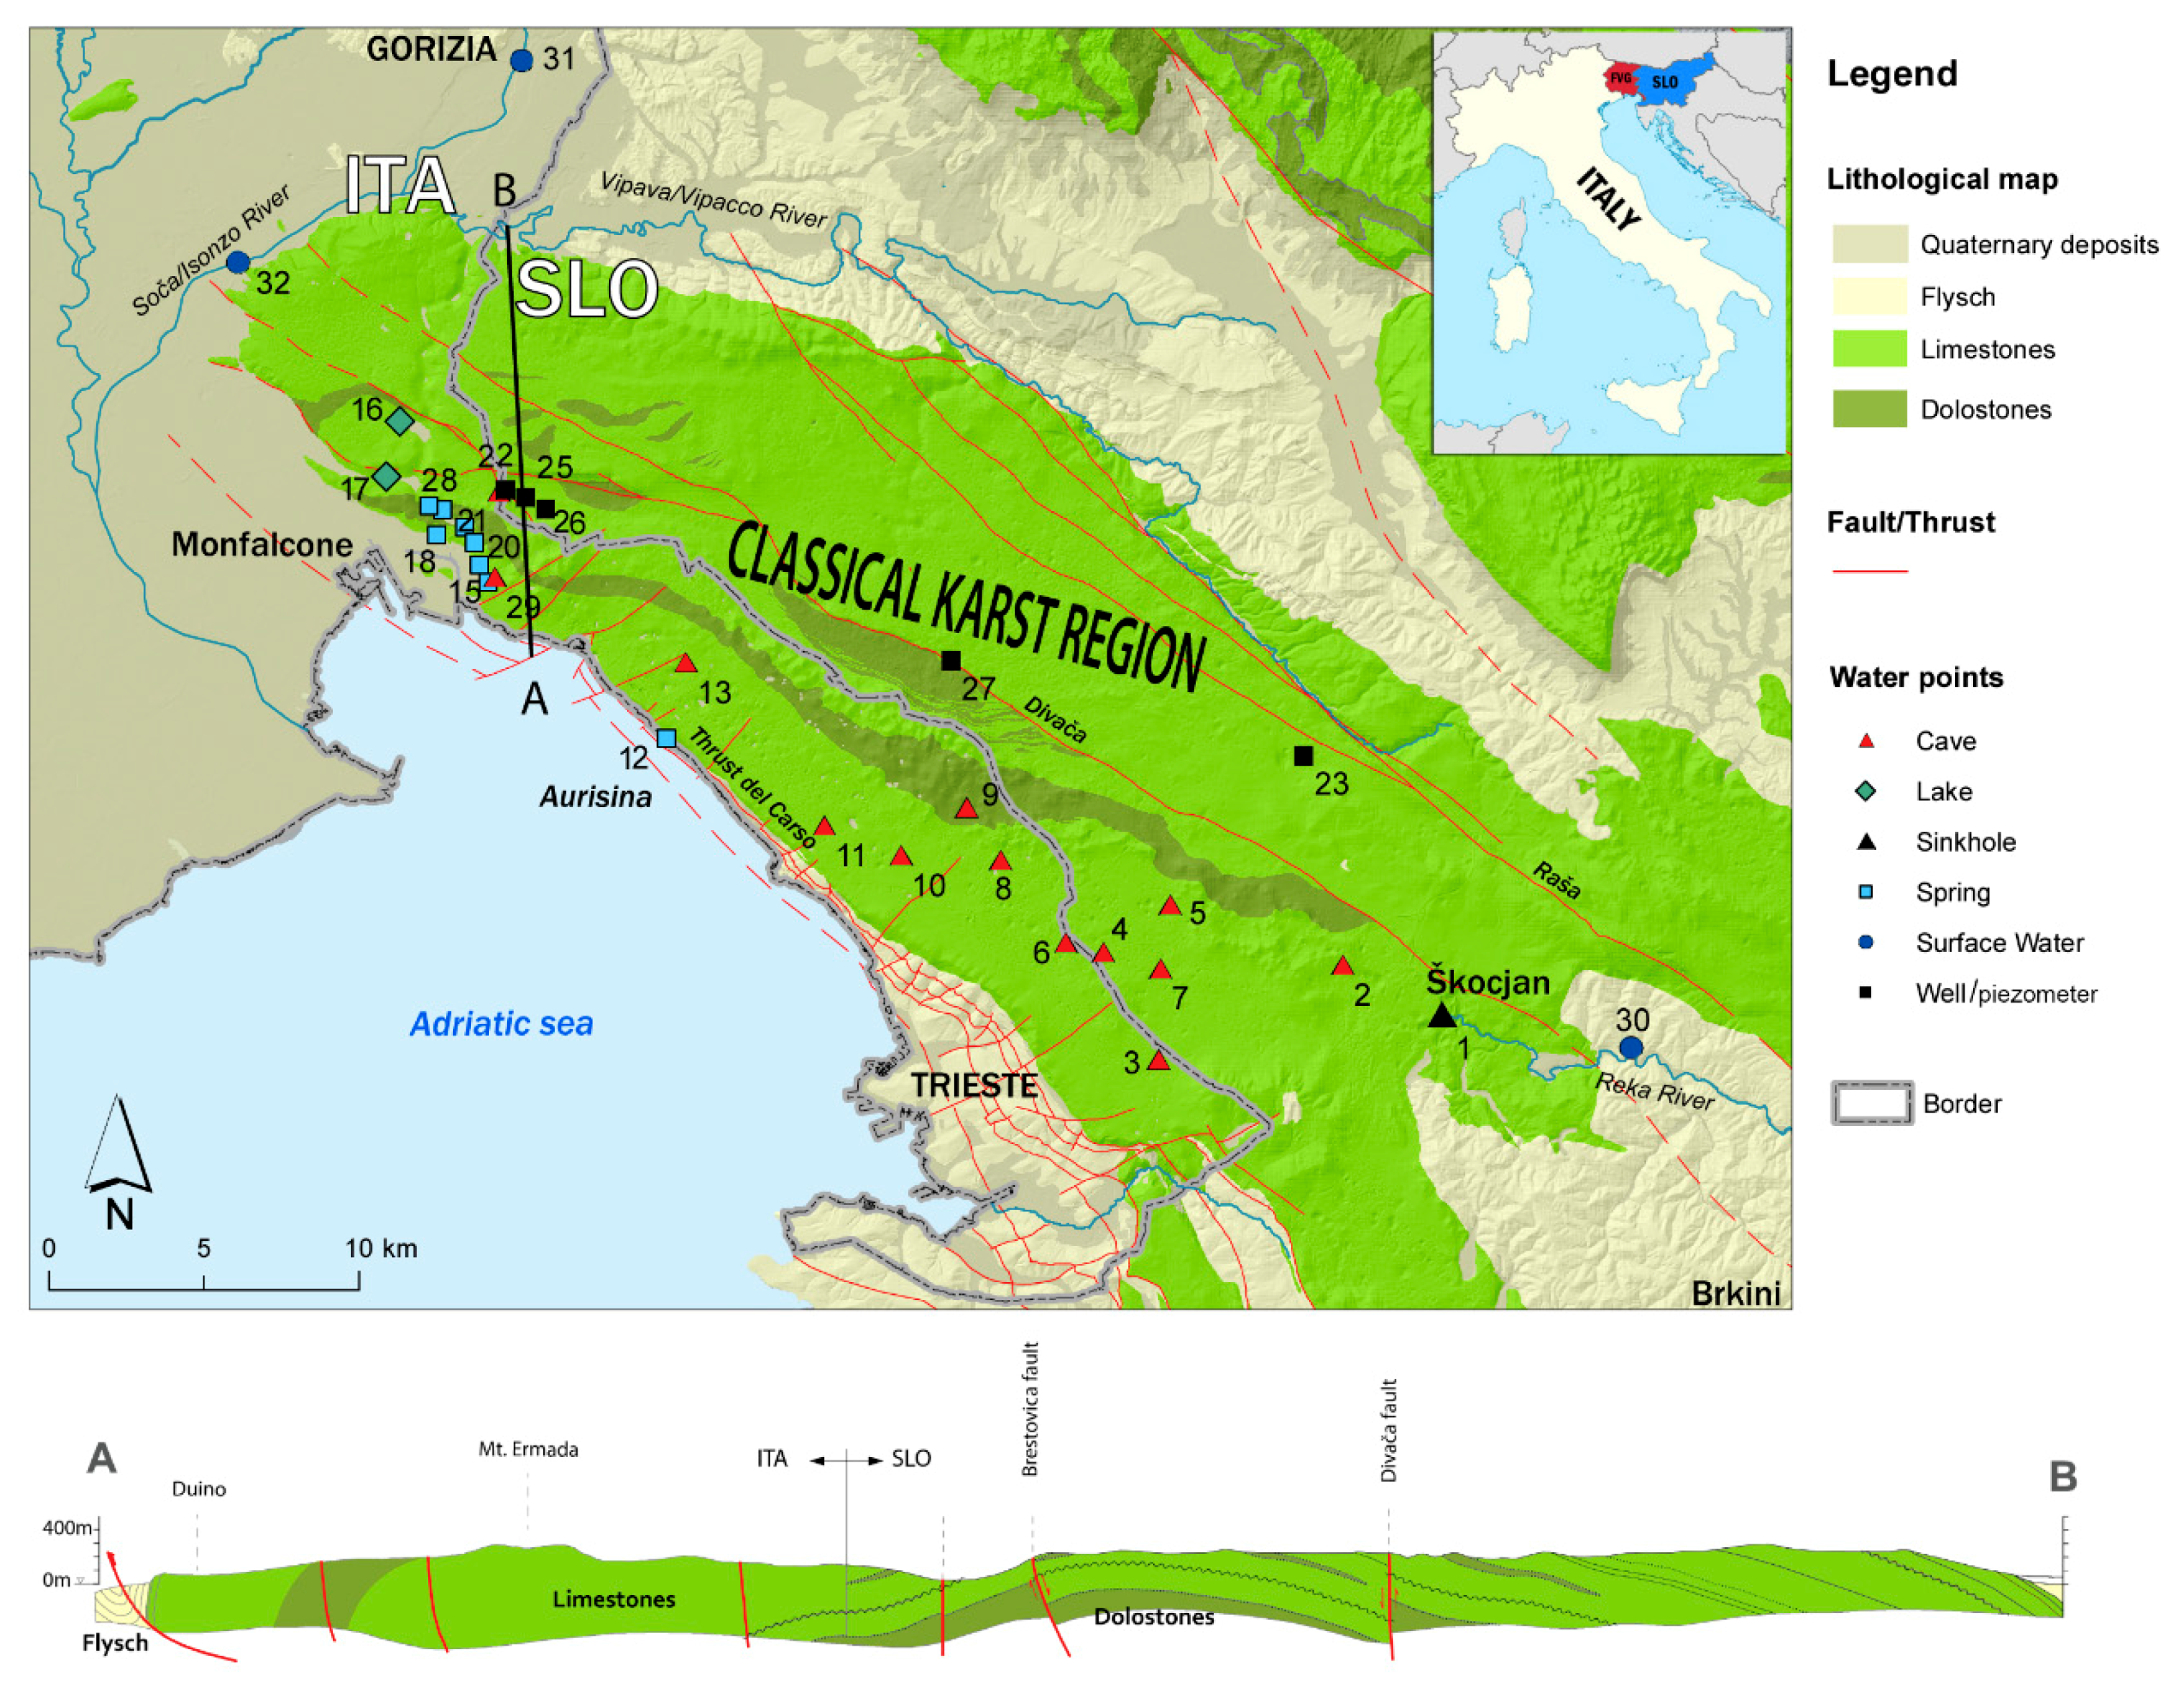 Geosciences | Free Full-Text | Groundwater Characterization by Means of  Conservative (δ18O and δ2H) and Non-Conservative (87Sr/86Sr) Isotopic  Values: The Classical Karst Region Aquifer Case (Italy–Slovenia)